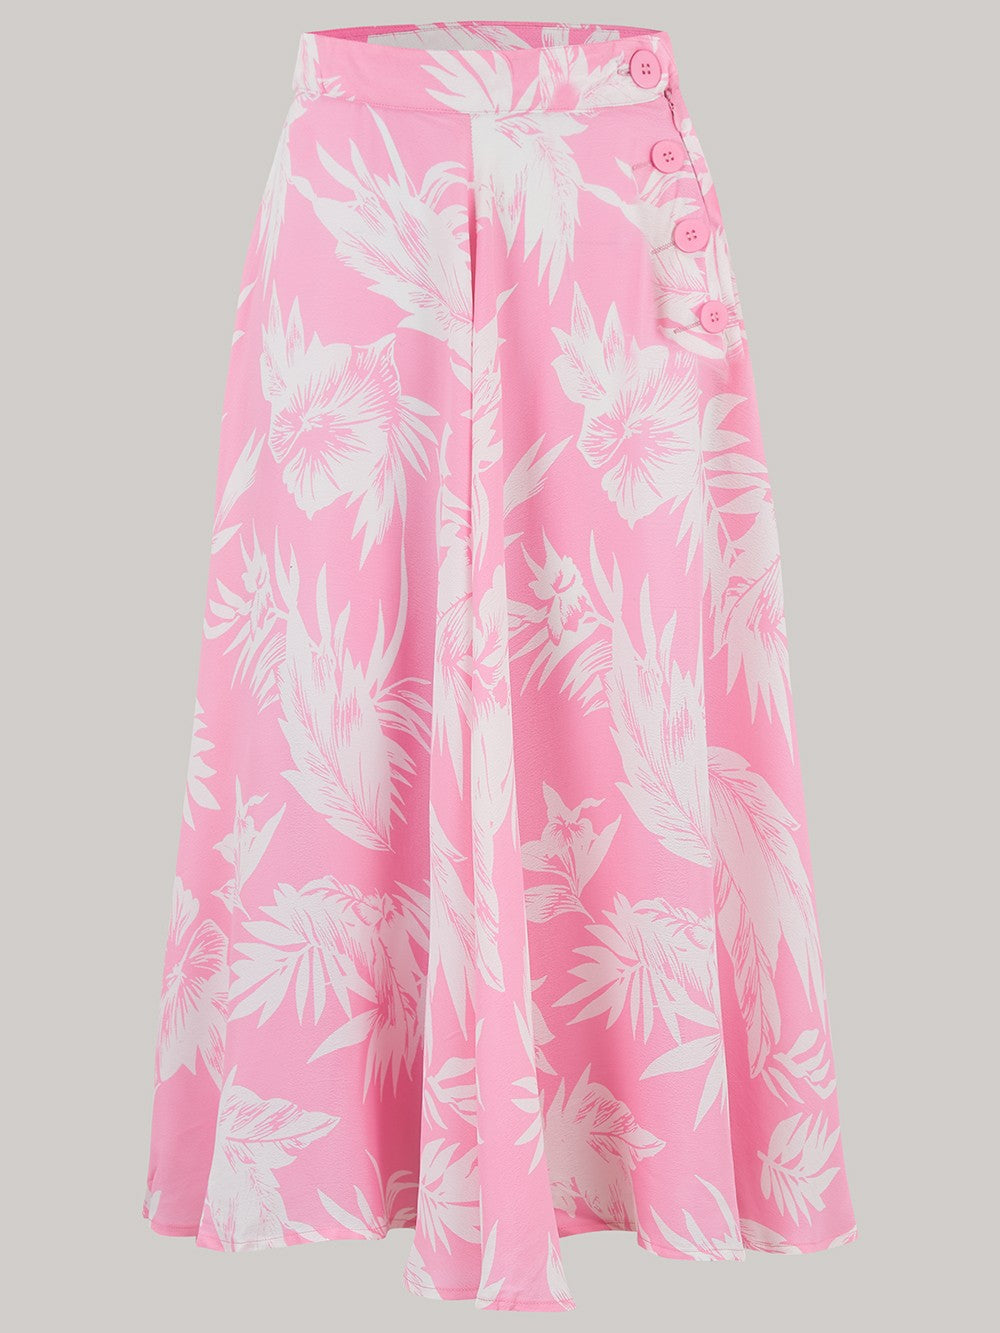 Maybelle Skirt in Pink Hawaii